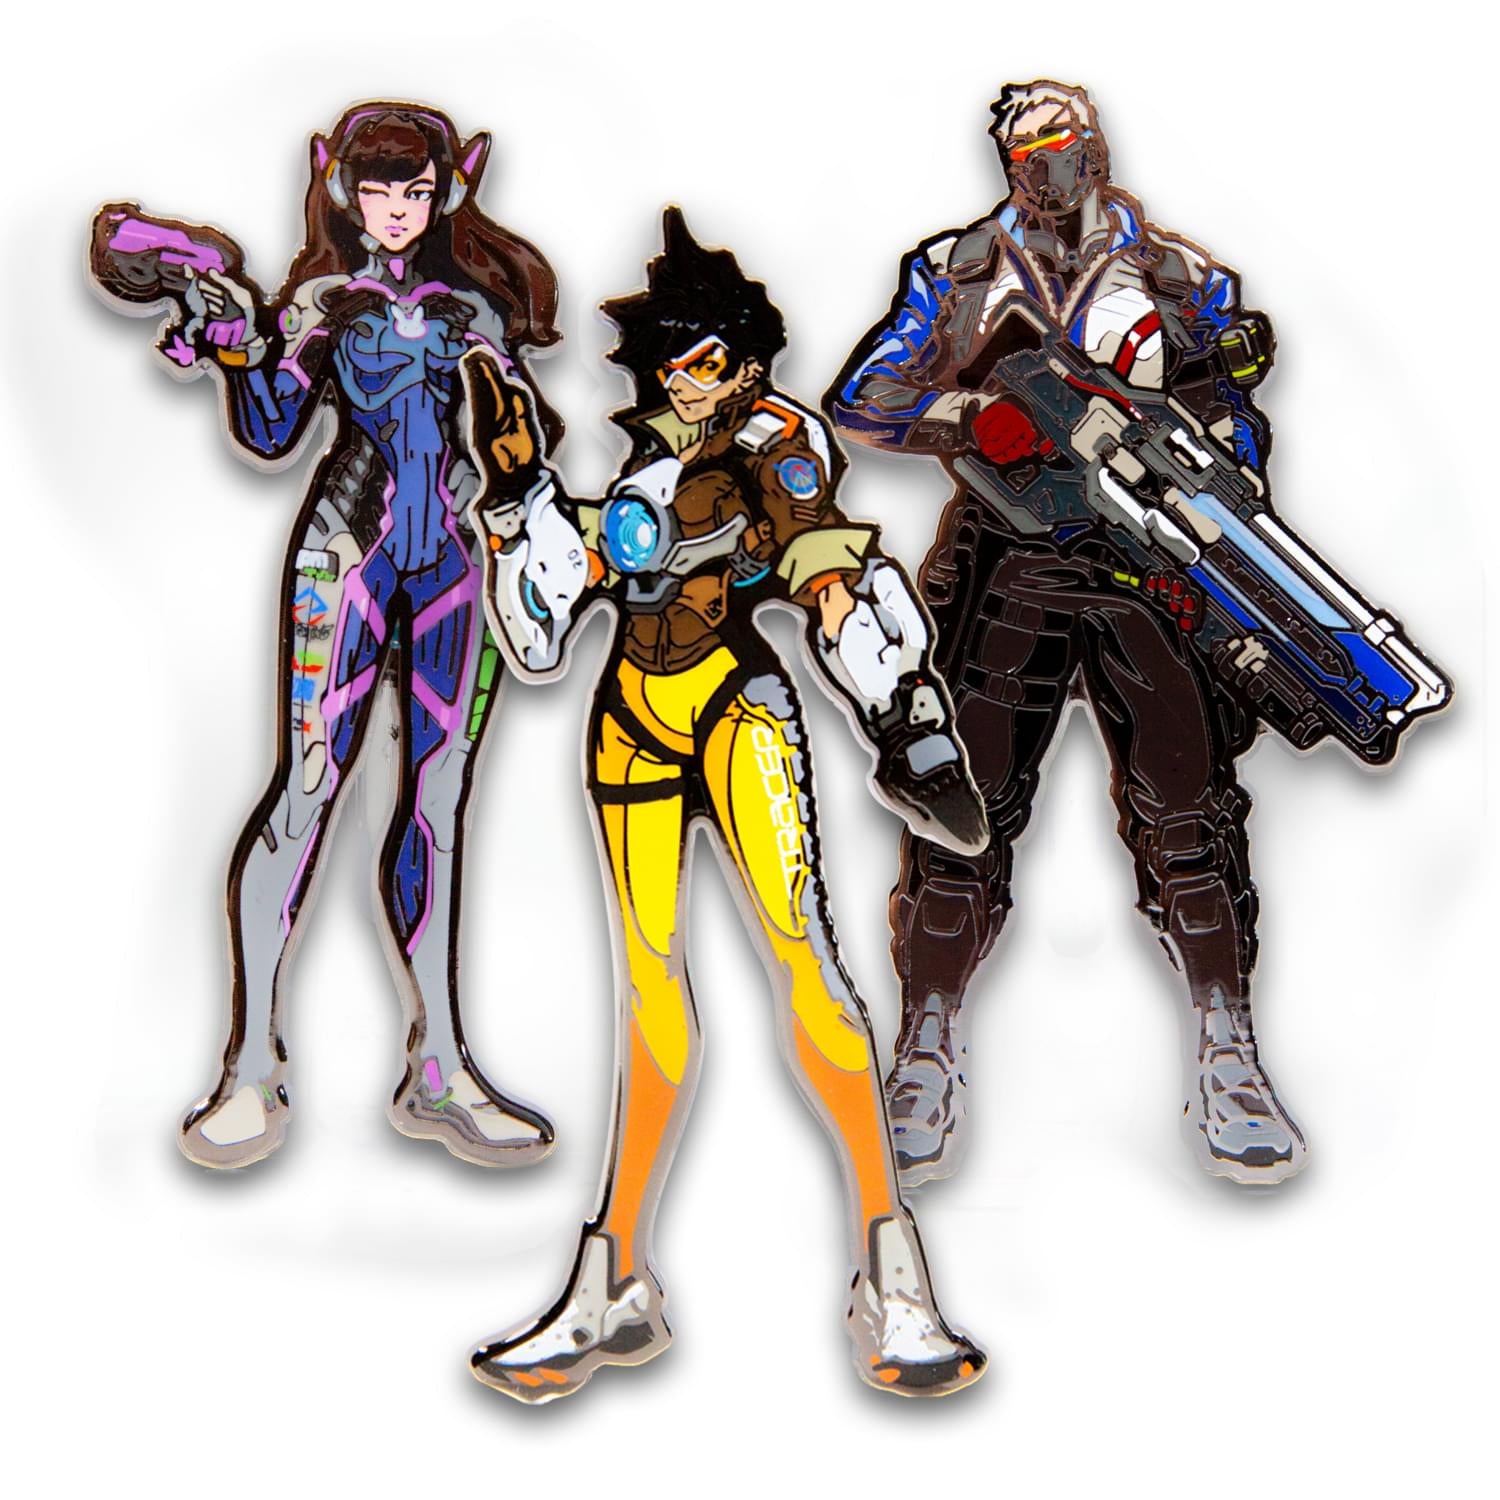 Overwatch Official Hero Pin Set | D. Va, Tracer, & Soldier 76 Pins | Set of 3